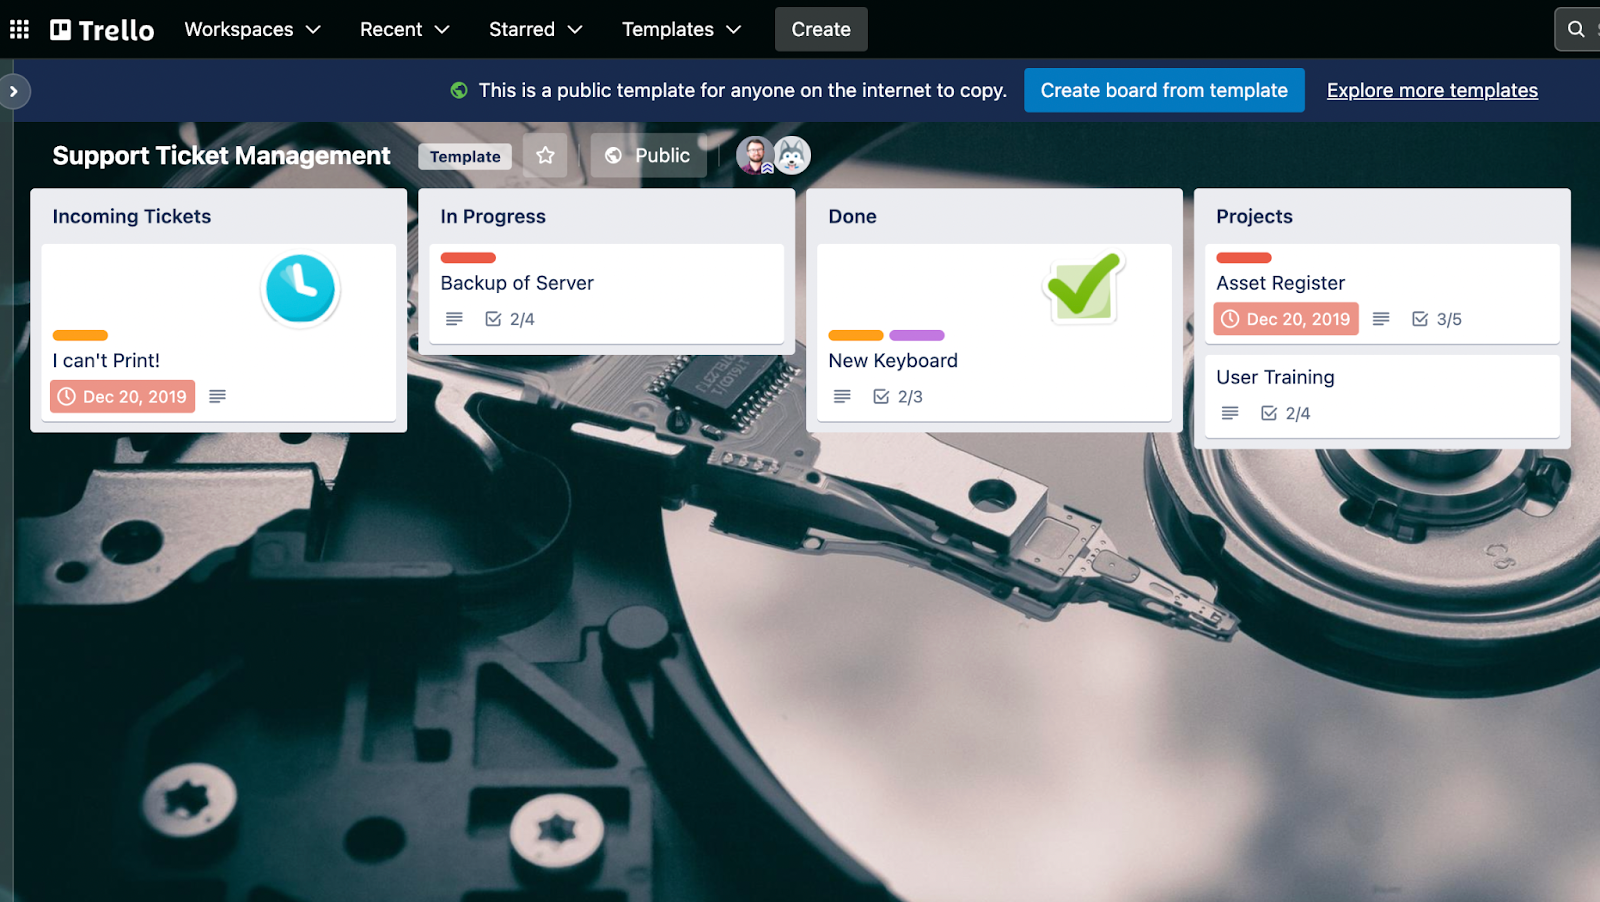 Screenshot of a Support Ticket Management board template in Trello